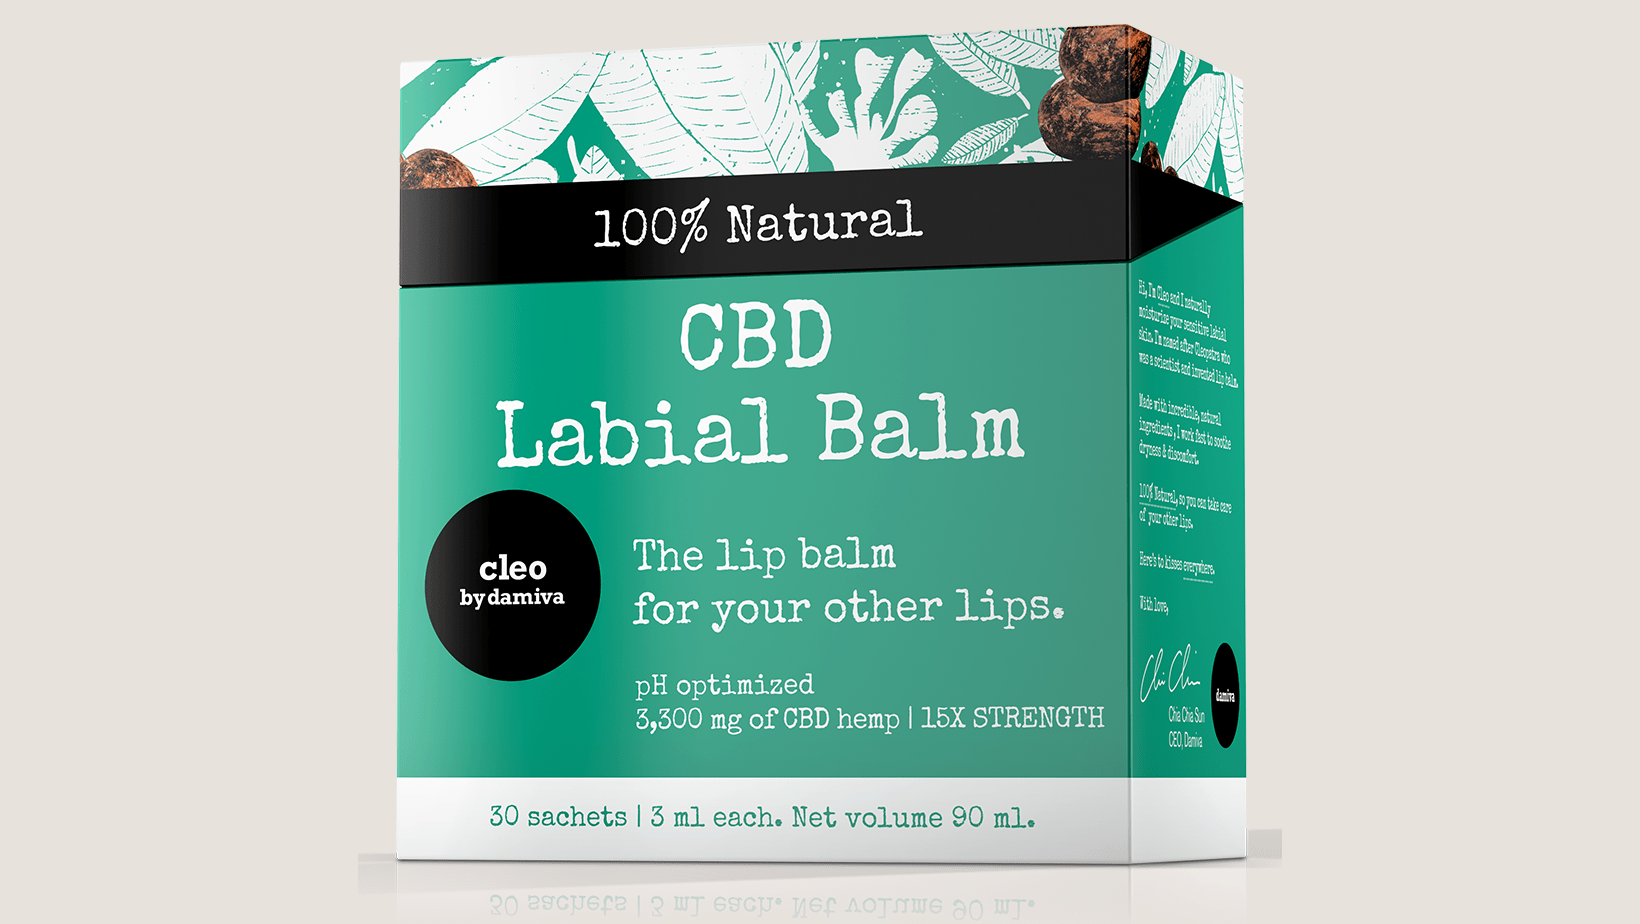 First Time Using Cleo Labial Balm With CBD?